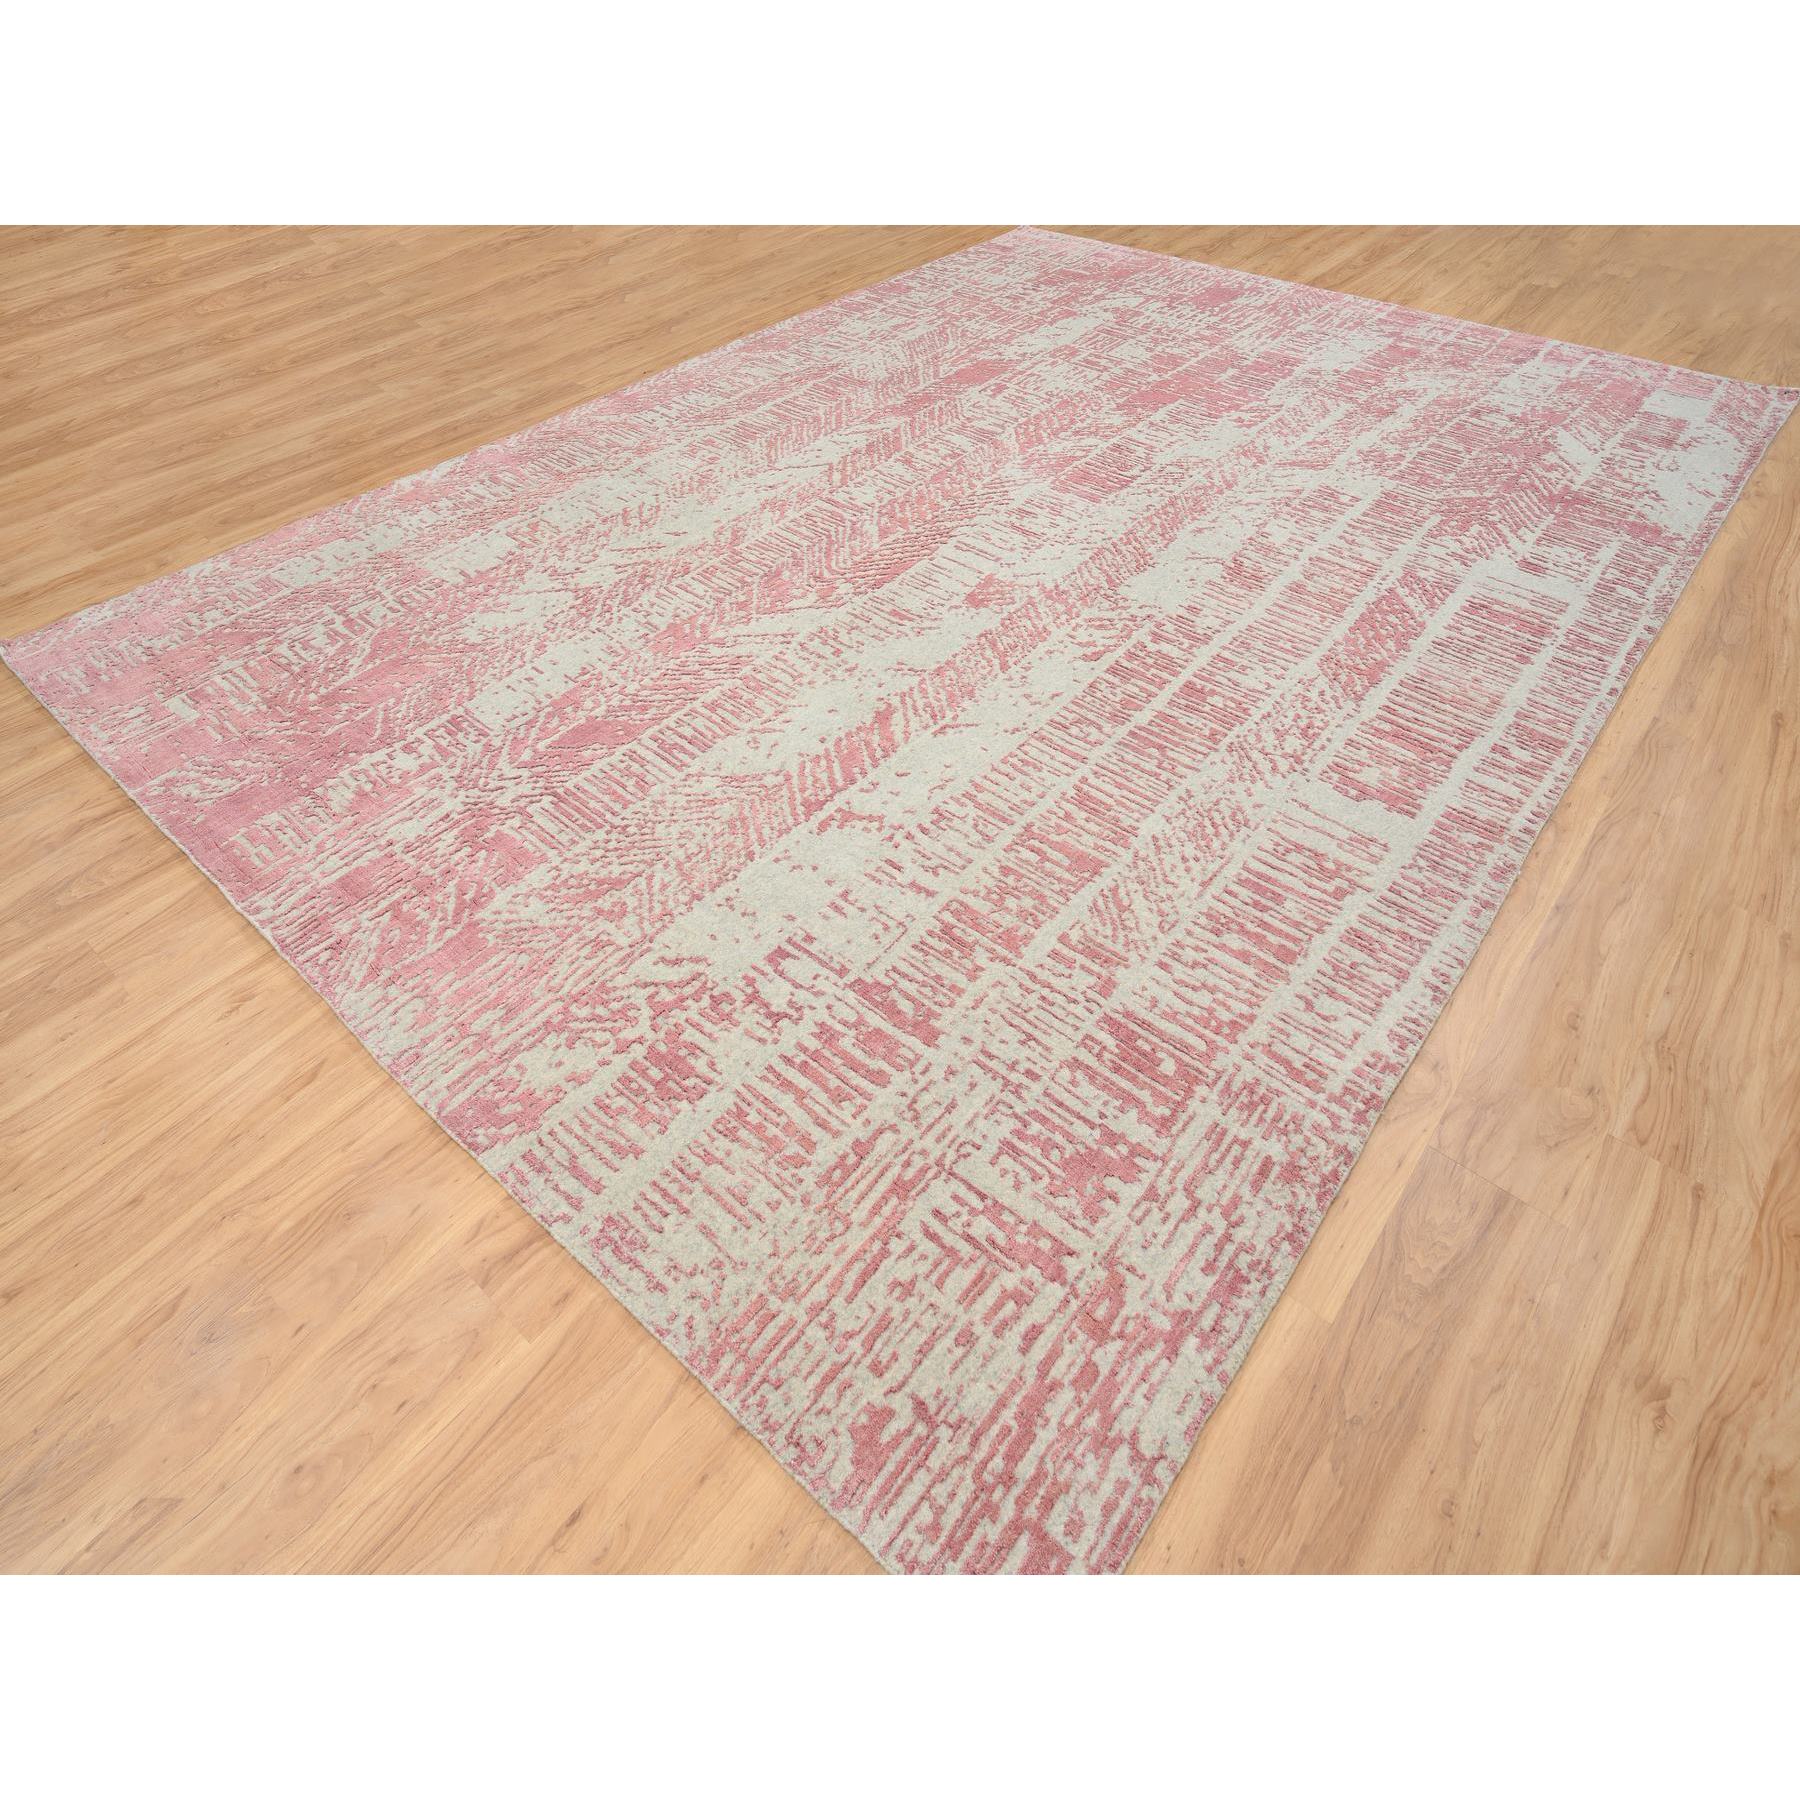 10'x14' Rose Pink, All Over Design Wool and Art Silk, Jacquard Hand Loomed, Oriental Rug 